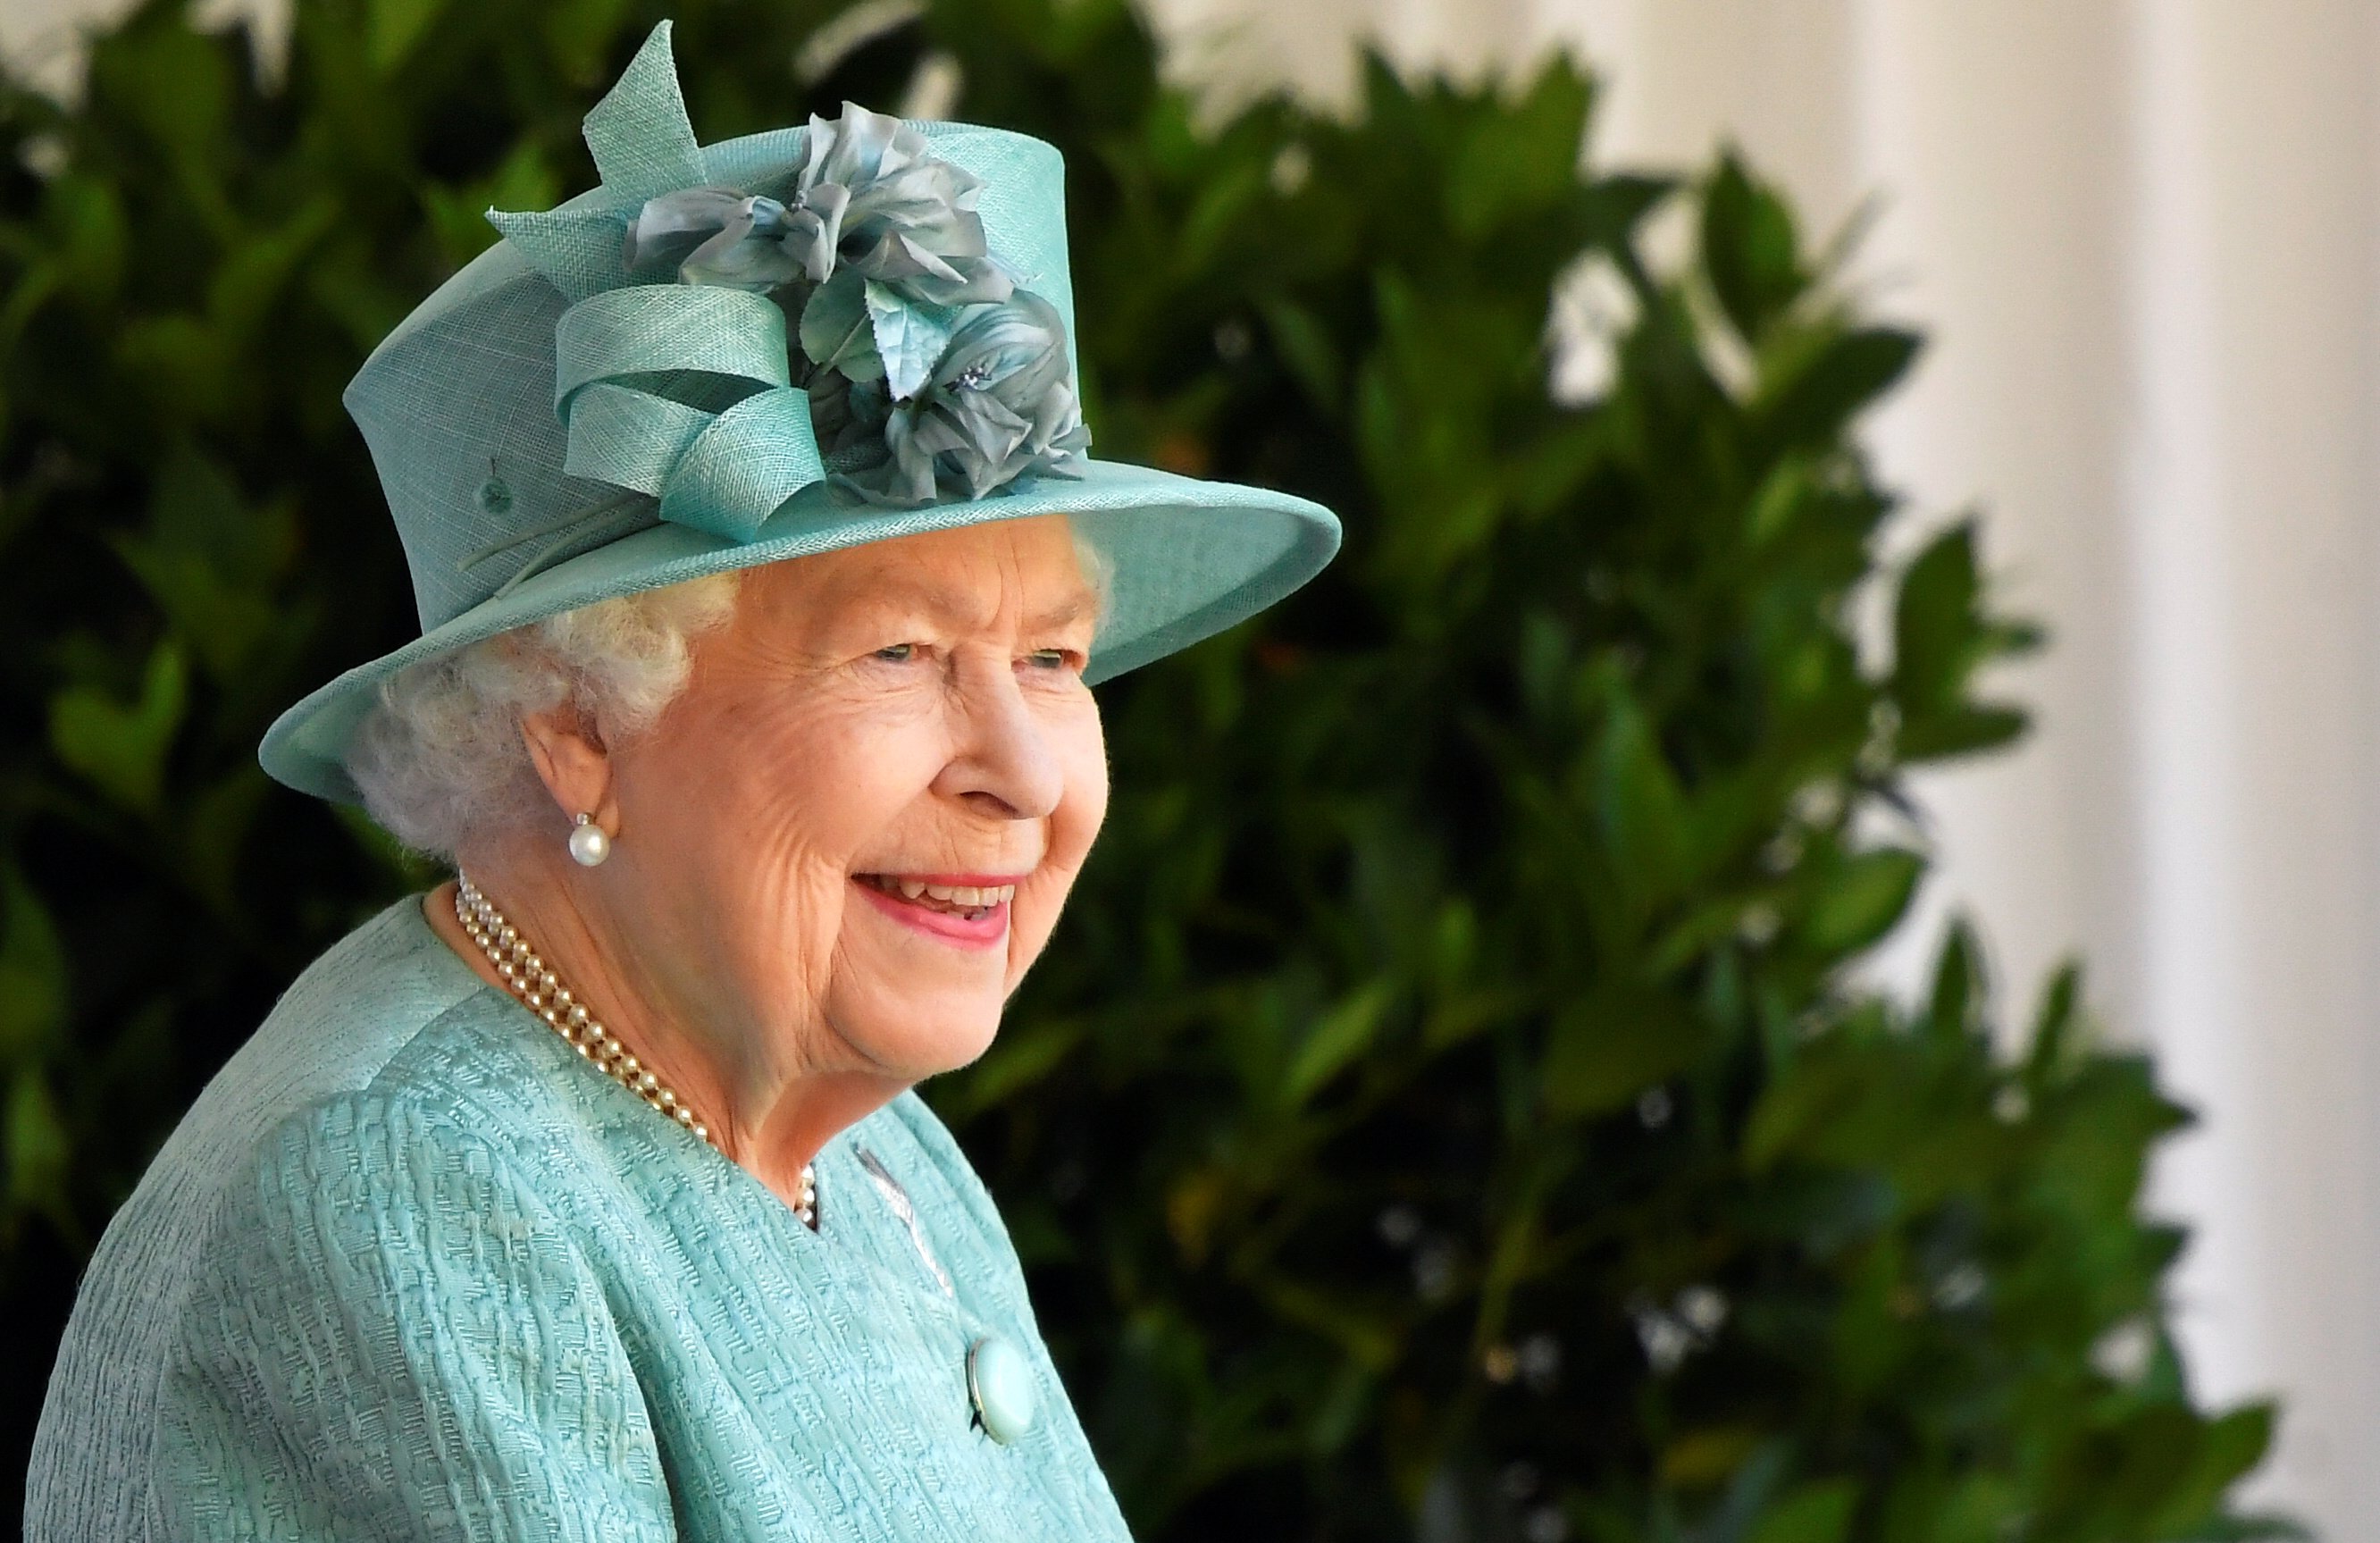  Queen Elizabeth II attends a ceremony to mark her official birthday at Windsor Castle on June 13, 2020, in Windsor, England. | Source: Getty Images.